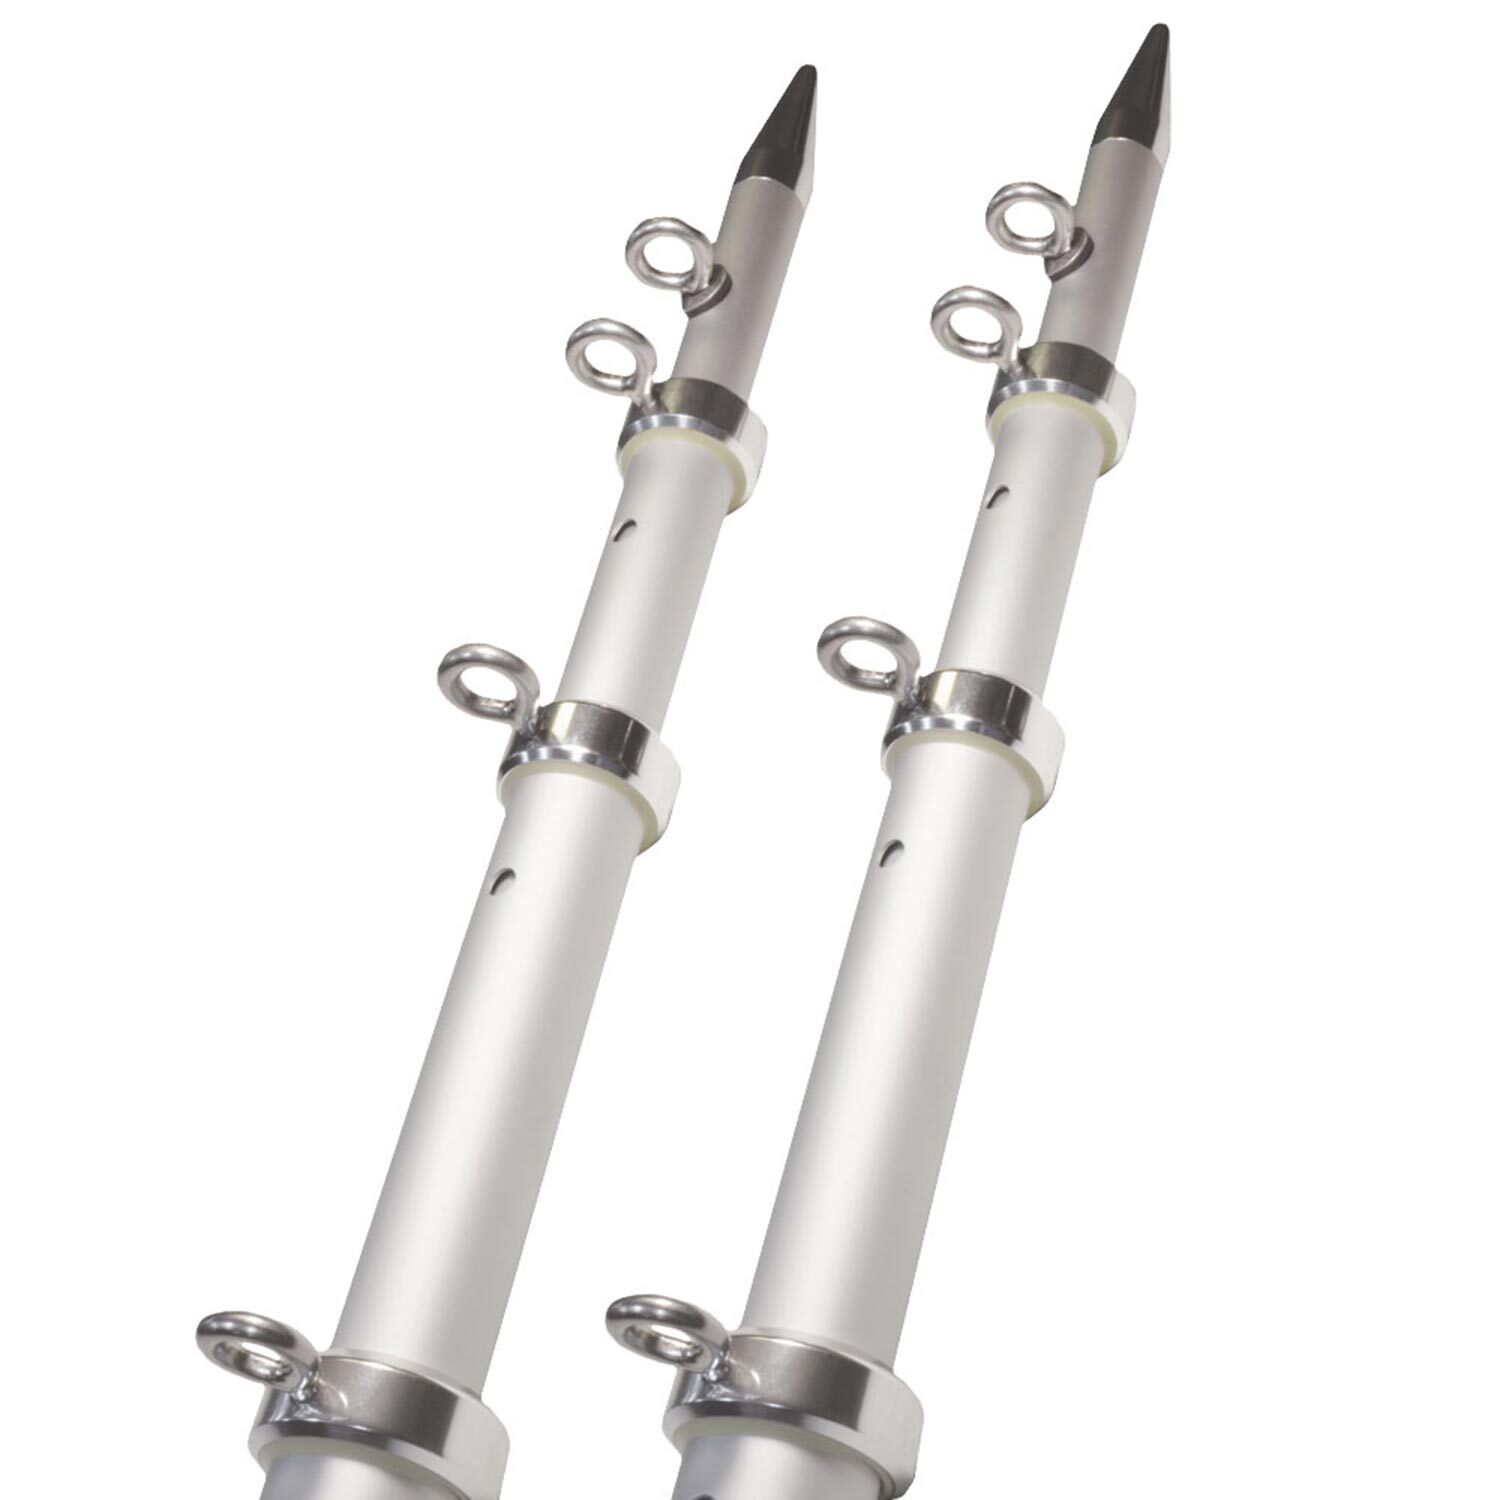 Wilson Fishing – Outrigger Poles and Fittings